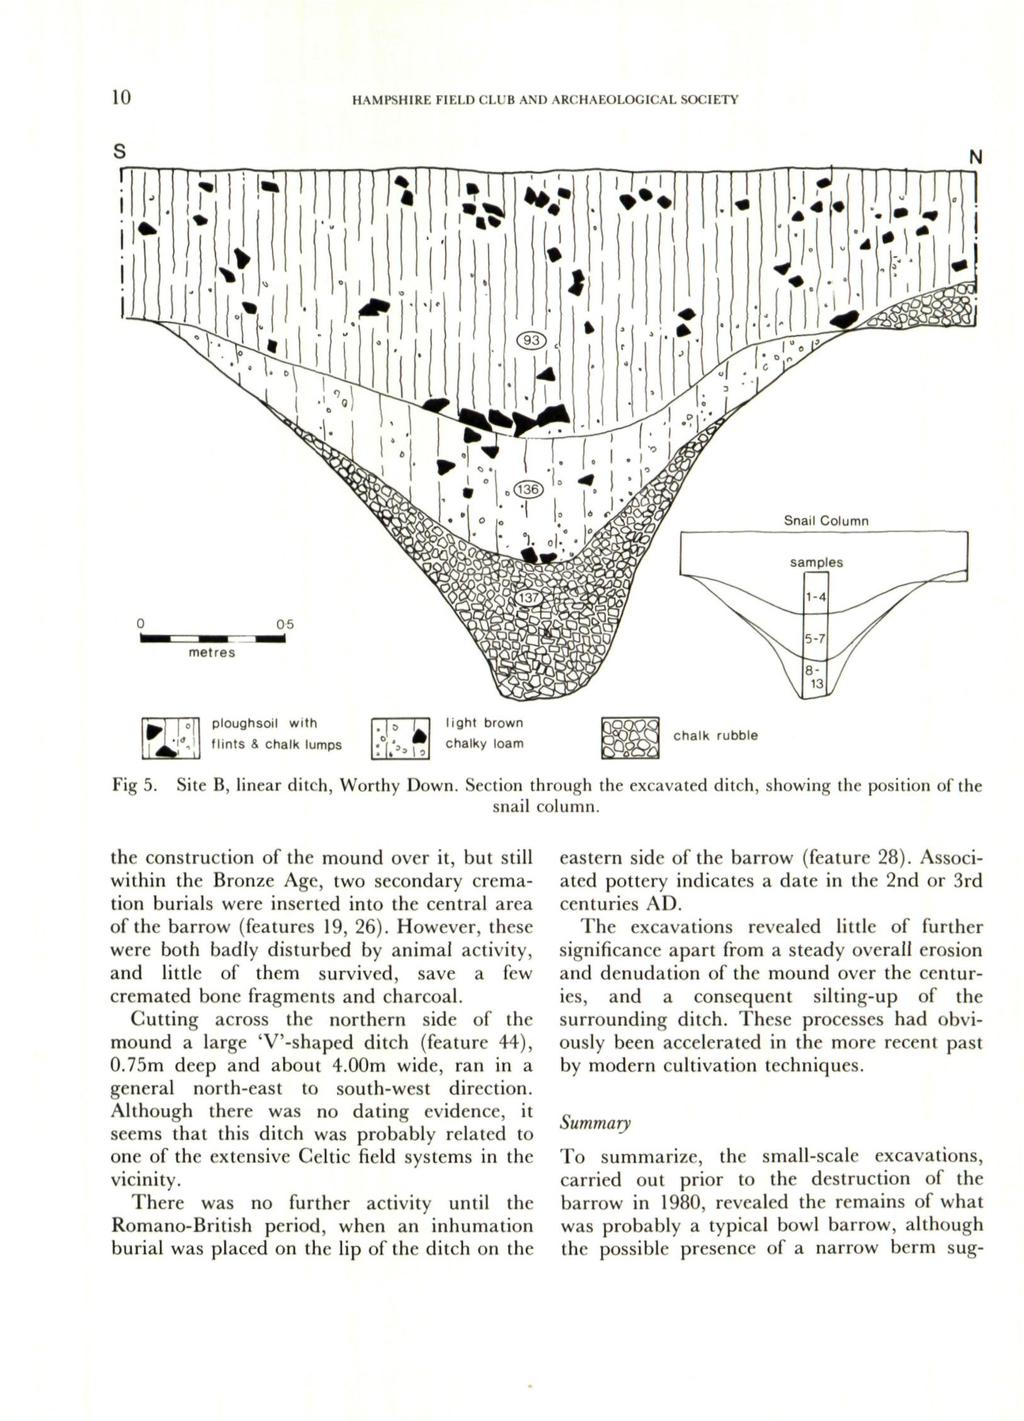 10 HAMPSHIRE FIELD CLUB AND ARCHAEOLOGICAL SOCIETY ploughsoil with flints & chalk lumps light brown chalky loam chalk rubble Fig 5. Site B, linear ditch, Worthy Down.